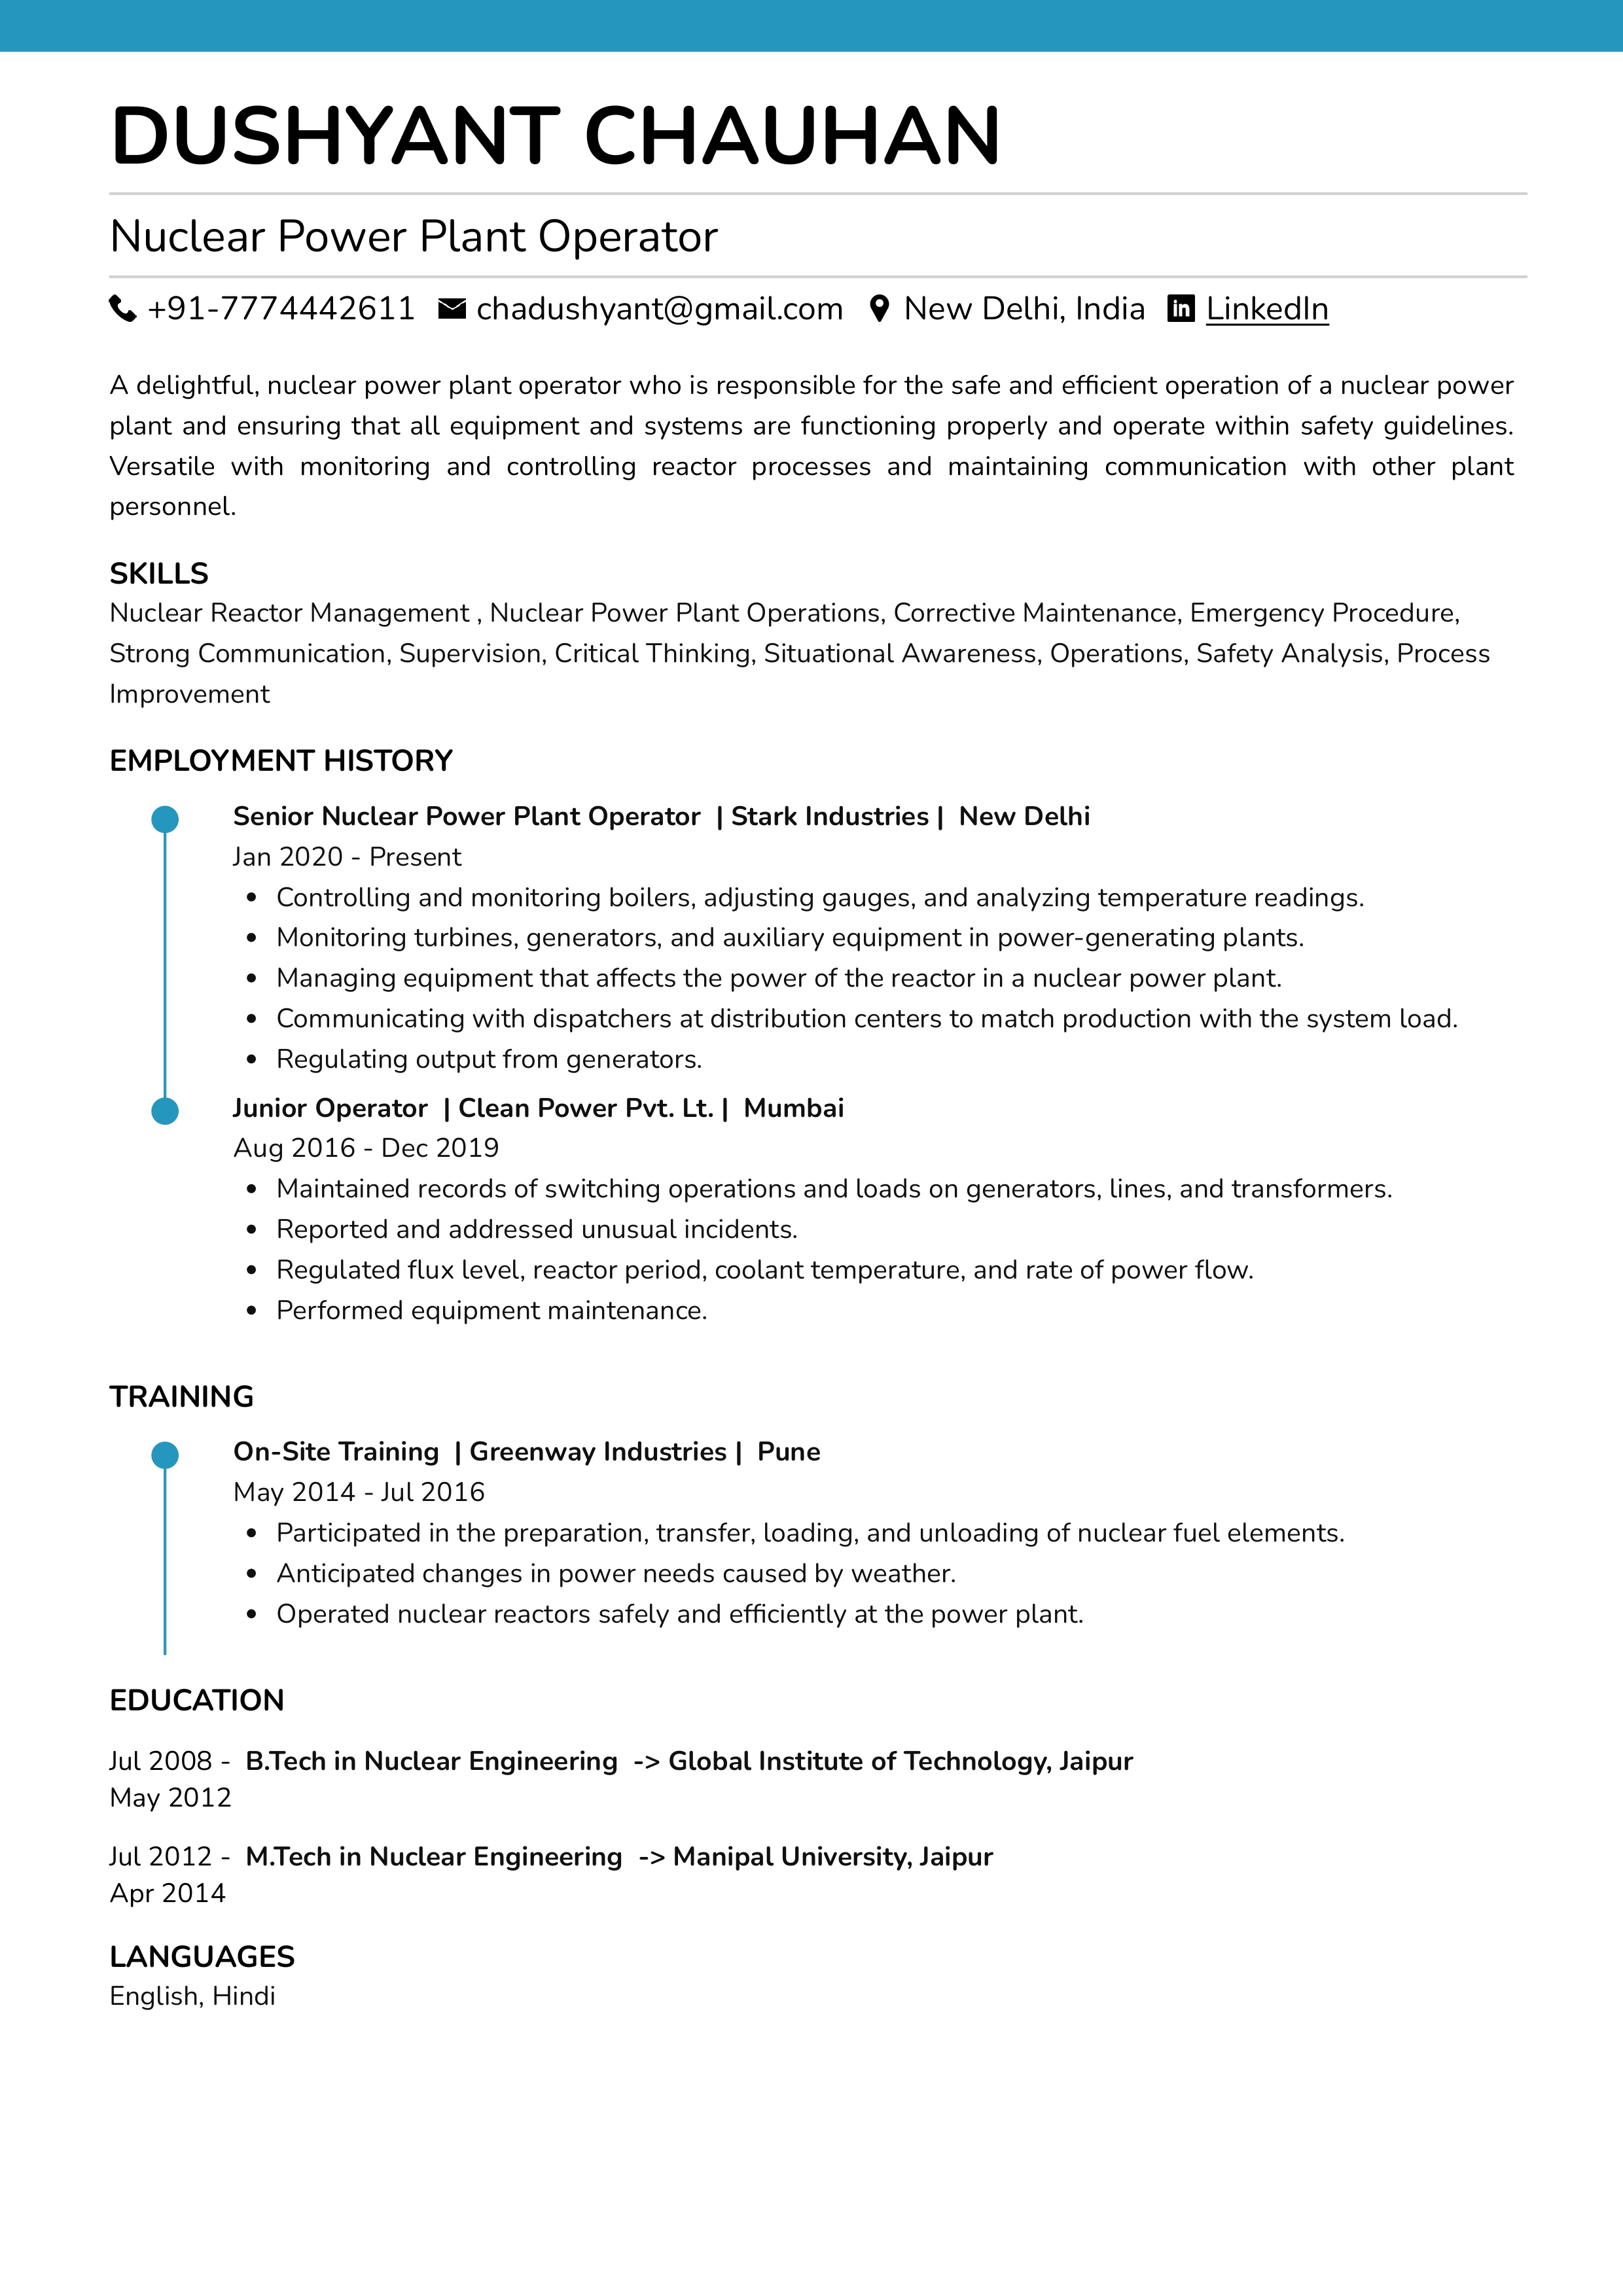 Sample Resume of Nuclear Power Plant Operator | Free Resume Templates & Samples on Resumod.co